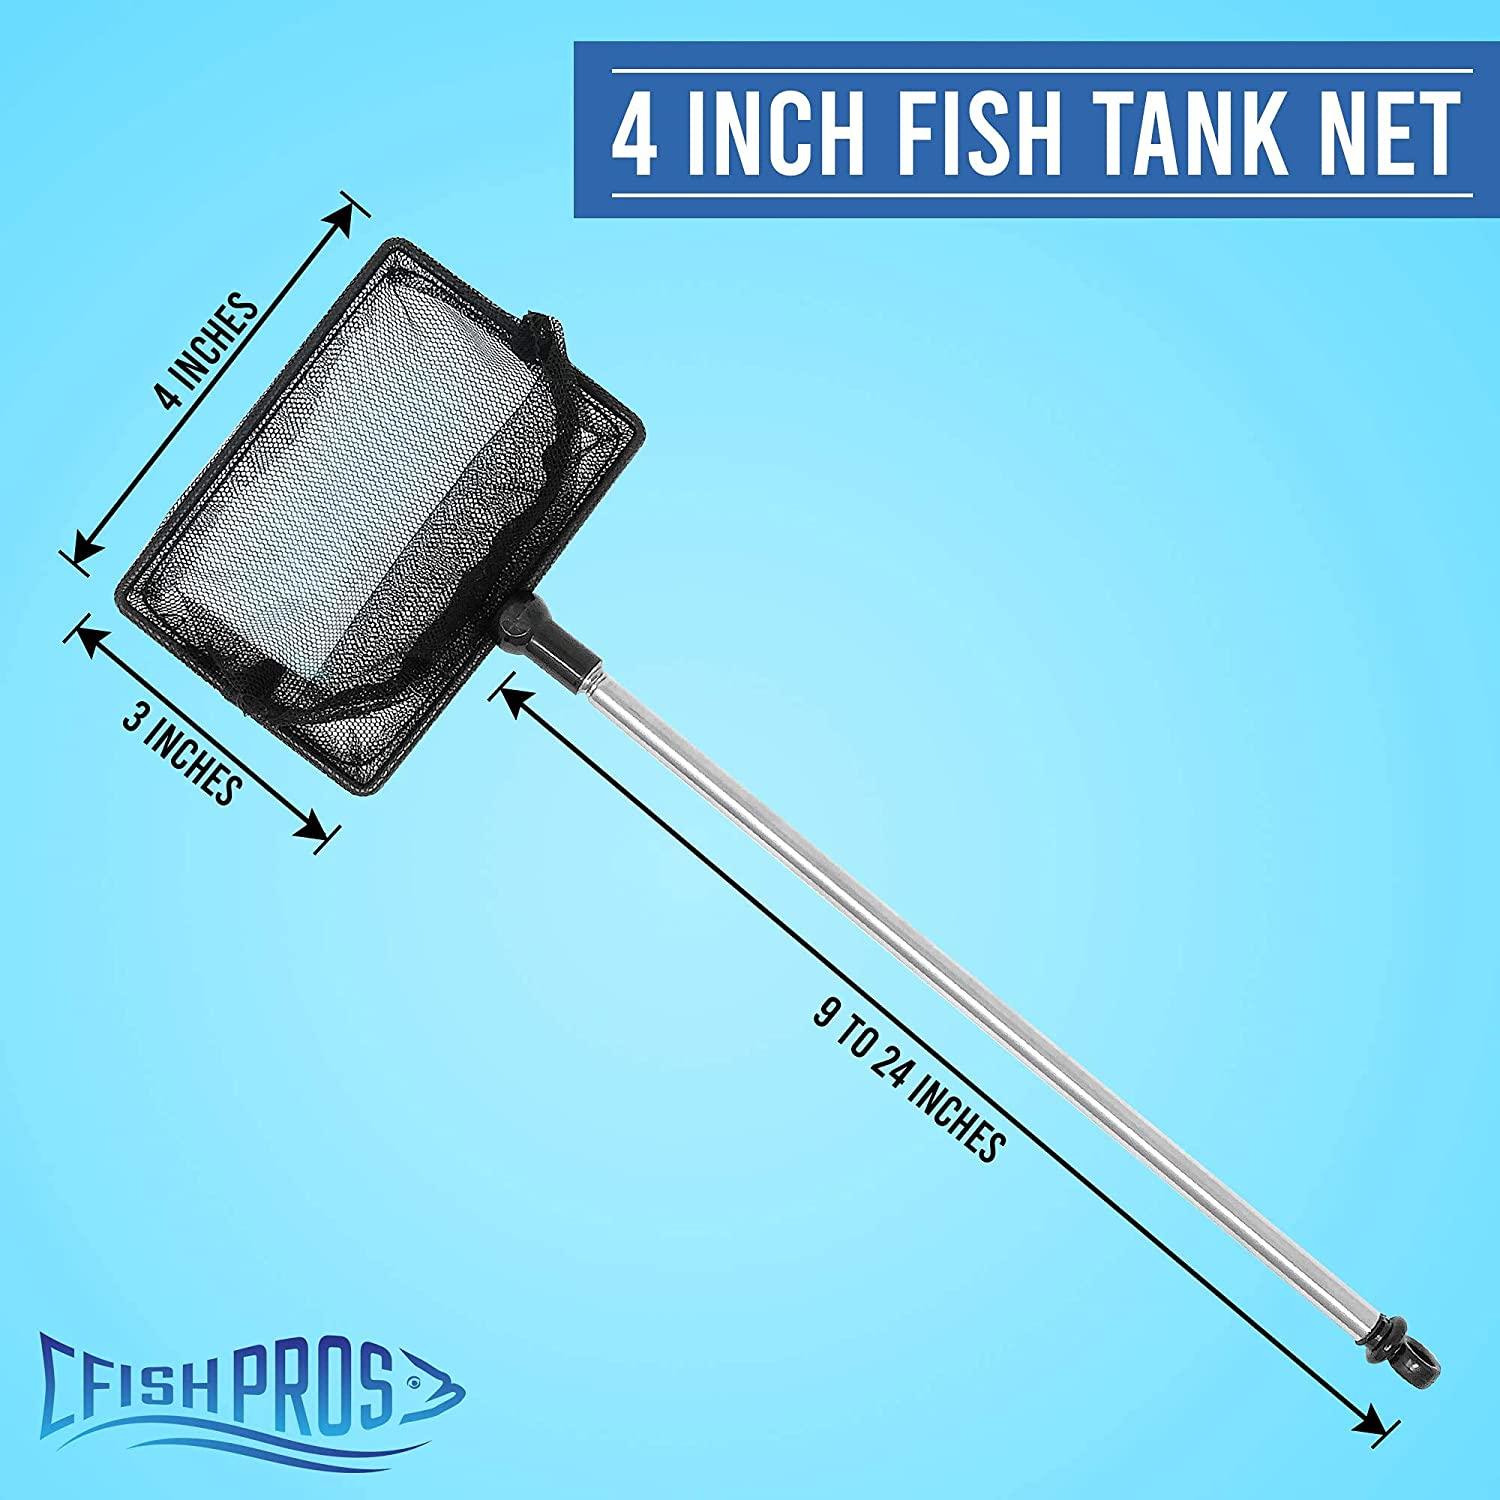 FISH PROS Fish Net for Fish Tank, 2.5 Inch Deep Mesh Scooper with